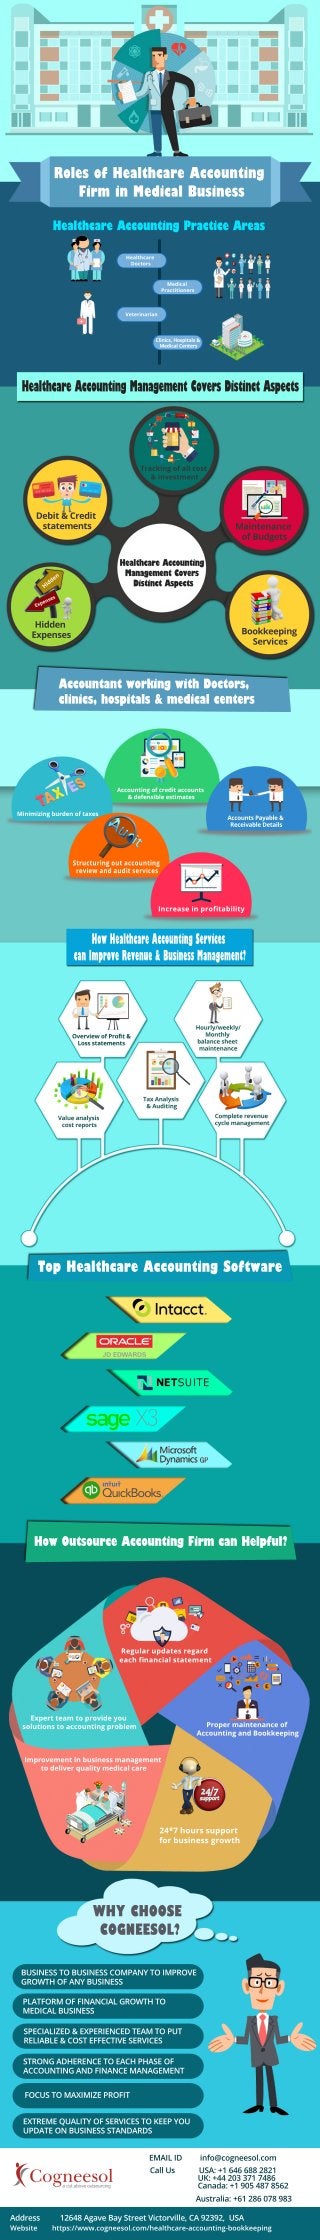 EMAILID info@cogneesol.com
Website https://www.cogneesol.com/healthcare-accounting-bookkeeping
CallUs USA:+16466882821
UK:+442033717486
Canada:+19054878562
Australia:+61286078983
Address 12648AgaveBayStreetVictorville,CA92392,USA
EXTREMEQUALITYOFSERVICESTOKEEPYOU
UPDATEONBUSINESSSTANDARDS
BUSINESSTOBUSINESSCOMPANYTOIMPROVE
GROWTHOFANYBUSINESS
PLATFORM OFFINANCIALGROWTHTO
MEDICALBUSINESS
SPECIALIZED&EXPERIENCEDTEAM TOPUT
RELIABLE&COSTEFFECTIVESERVICES
STRONGADHERENCETOEACHPHASEOF
ACCOUNTINGANDFINANCEMANAGEMENT
FOCUSTOMAXIMIZEPROFIT
WHYCHOOSE
COGNEESOL?
Expertteam toprovideyou
solutionstoaccountingproblem
Regularupdatesregard
eachﬁnancialstatement
Propermaintenanceof
AccountingandBookkeeping
24*7hourssupport
forbusinessgrowth
Improvementinbusinessmanagement
todeliverqualitymedicalcare
HowOutsourceAccountingFirmcanHelpful?
TopHealthcareAccountingSoftware
Completerevenue
cyclemanagement
TaxAnalysis
&Auditing
Valueanalysis
costreports
Hourly/weekly/
Monthly
balancesheet
maintenance
OverviewofProﬁt&
Lossstatements
HowHealthcareAccountingServices
canImproveRevenue&BusinessManagement?
AccountantworkingwithDoctors,
clinics,hospitals&medicalcenters
Increaseinproﬁtability
AccountsPayable&
ReceivableDetails
Minimizingburdenoftaxes
Structuringoutaccounting
reviewandauditservices
Accountingofcreditaccounts
&defensibleestimates
Bookkeeping
Services
Debit&Credit
statements
Hidden
Expenses
Trackingofallcost
&investment
Maintenance
ofBudgets
HealthcareAccounting
ManagementCovers
DistinctAspects
HealthcareAccountingManagementCoversDistinctAspects
HealthcareAccountingPracticeAreas
Healthcare
Doctors
Medical
Practitioners
Veterinarian
Clinics,Hospitals&
MedicalCenters
RolesofHealthcareAccounting
FirminMedicalBusiness
 